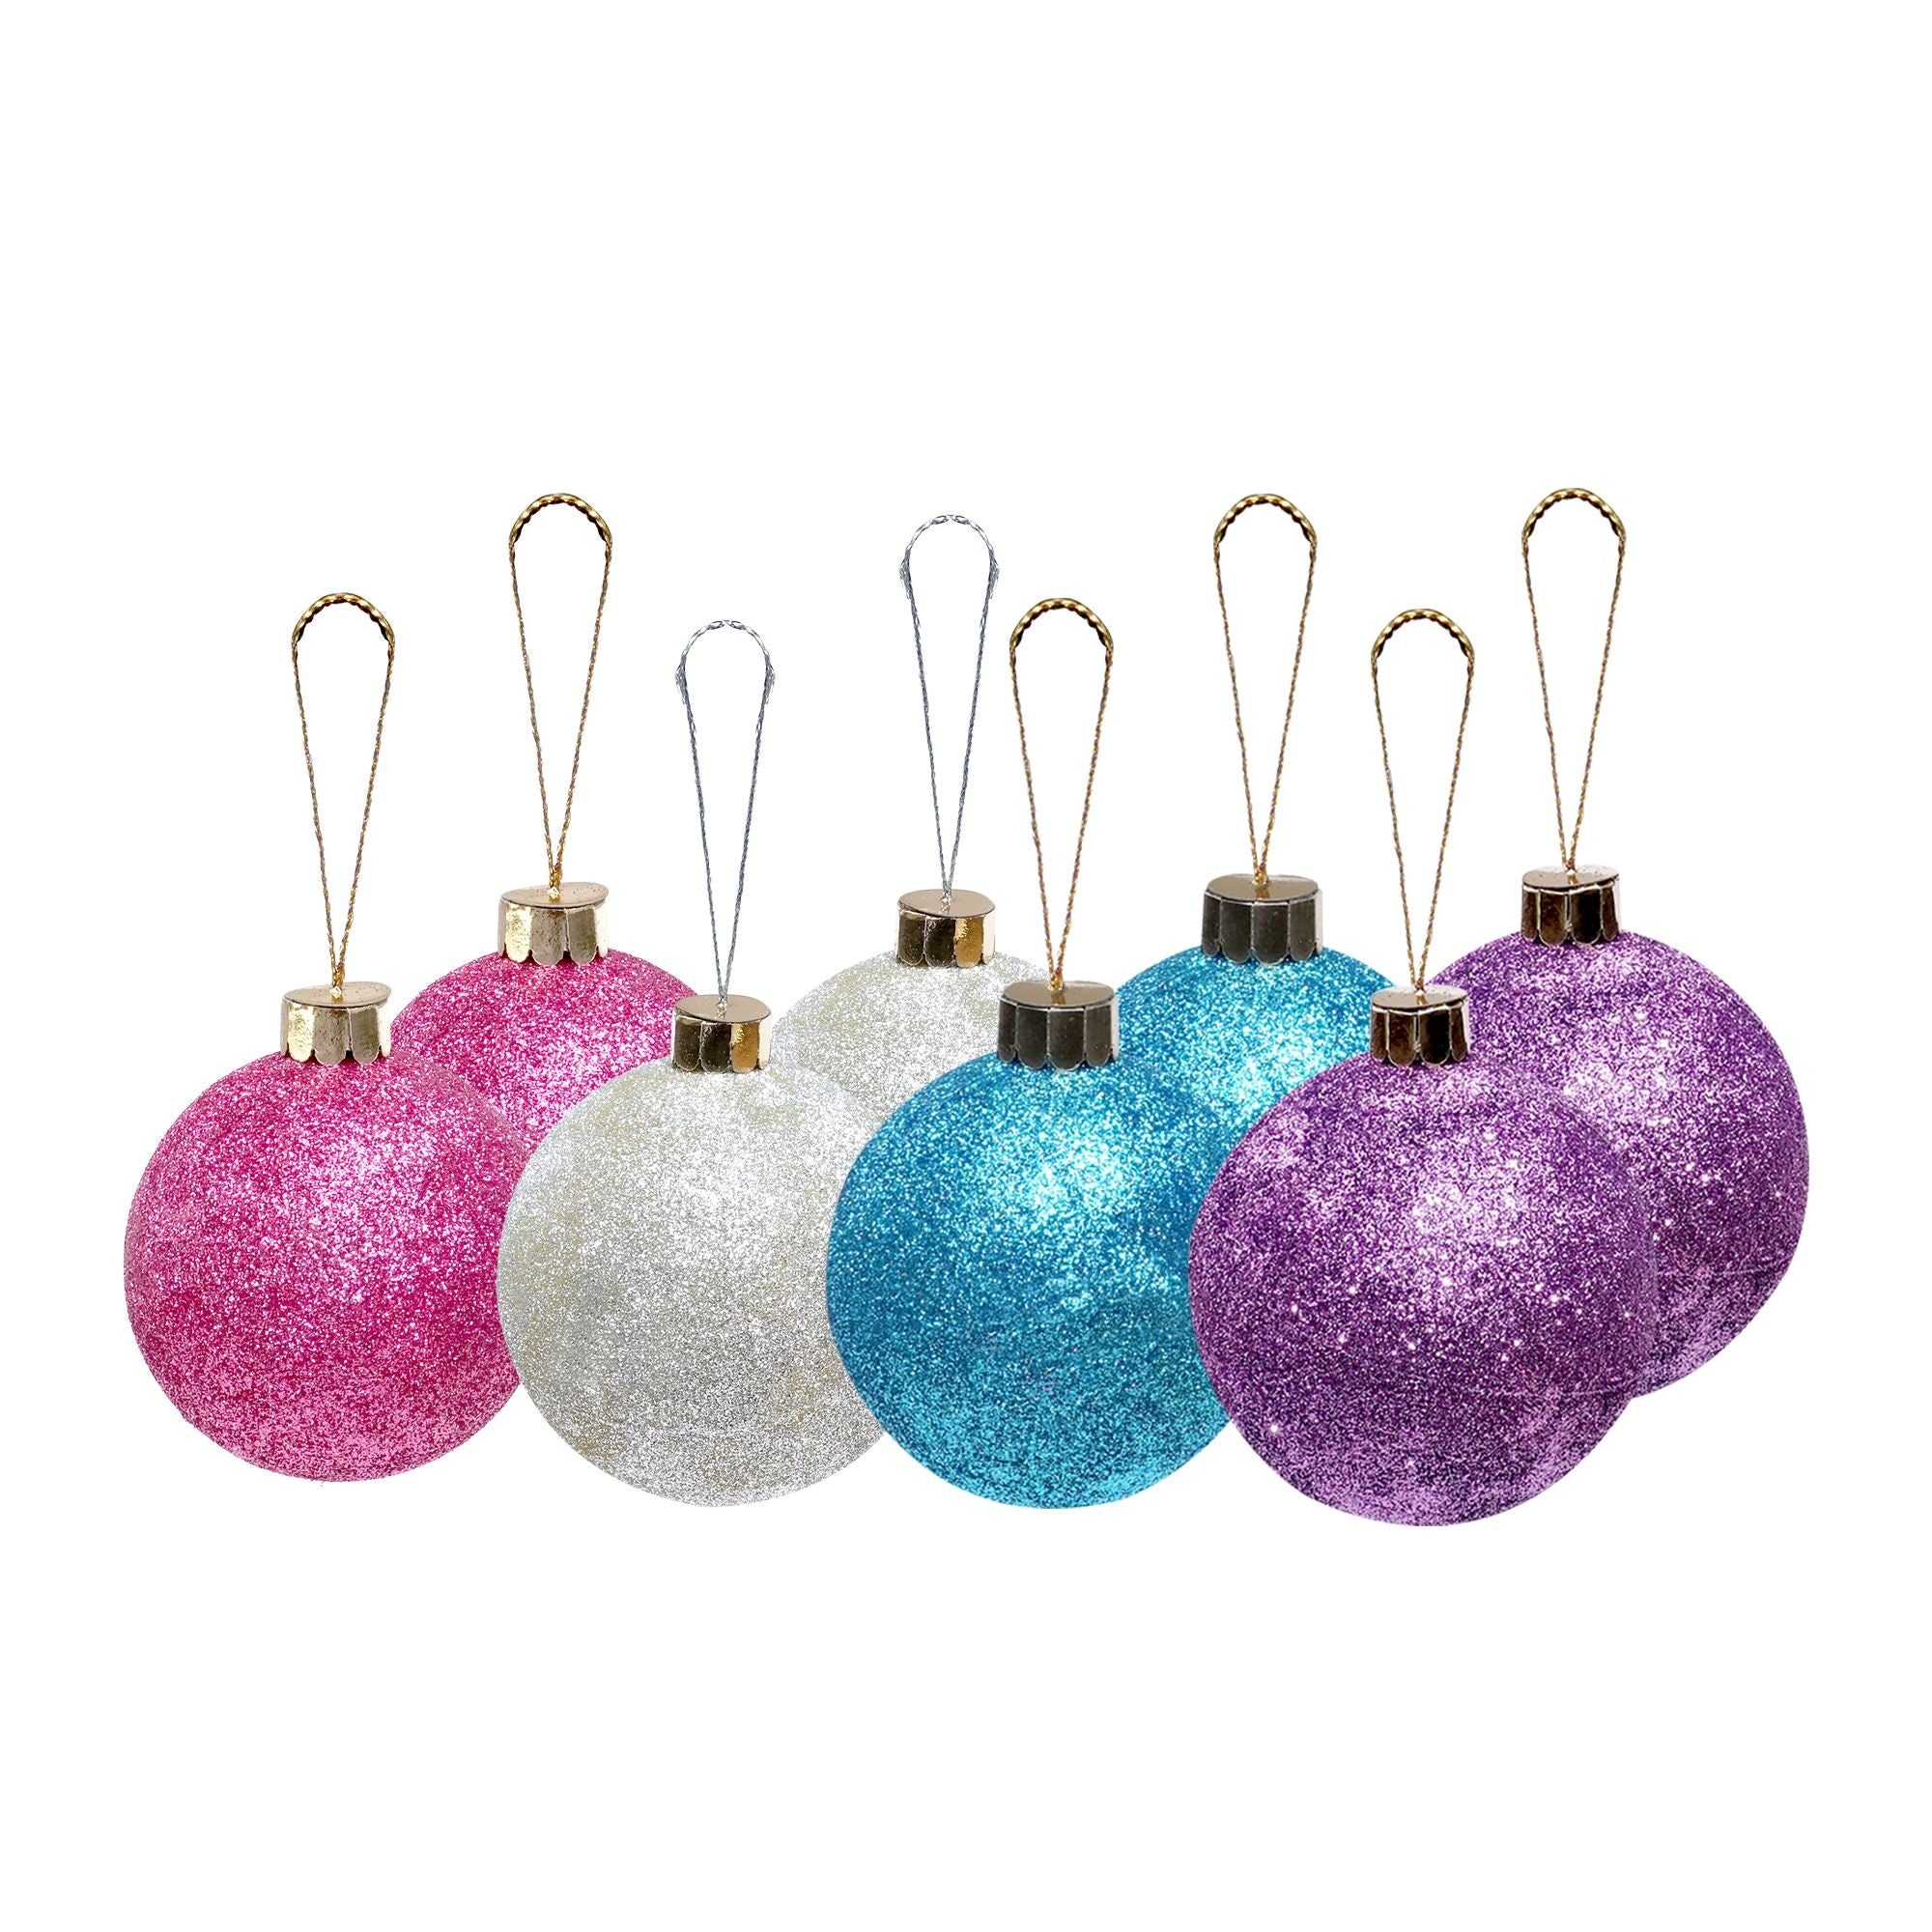 Handmade Christmas Ornaments - Glitter Baubles, 50mm, Assorted Colours - Blue, Purple, Silver, Pink, 8pc